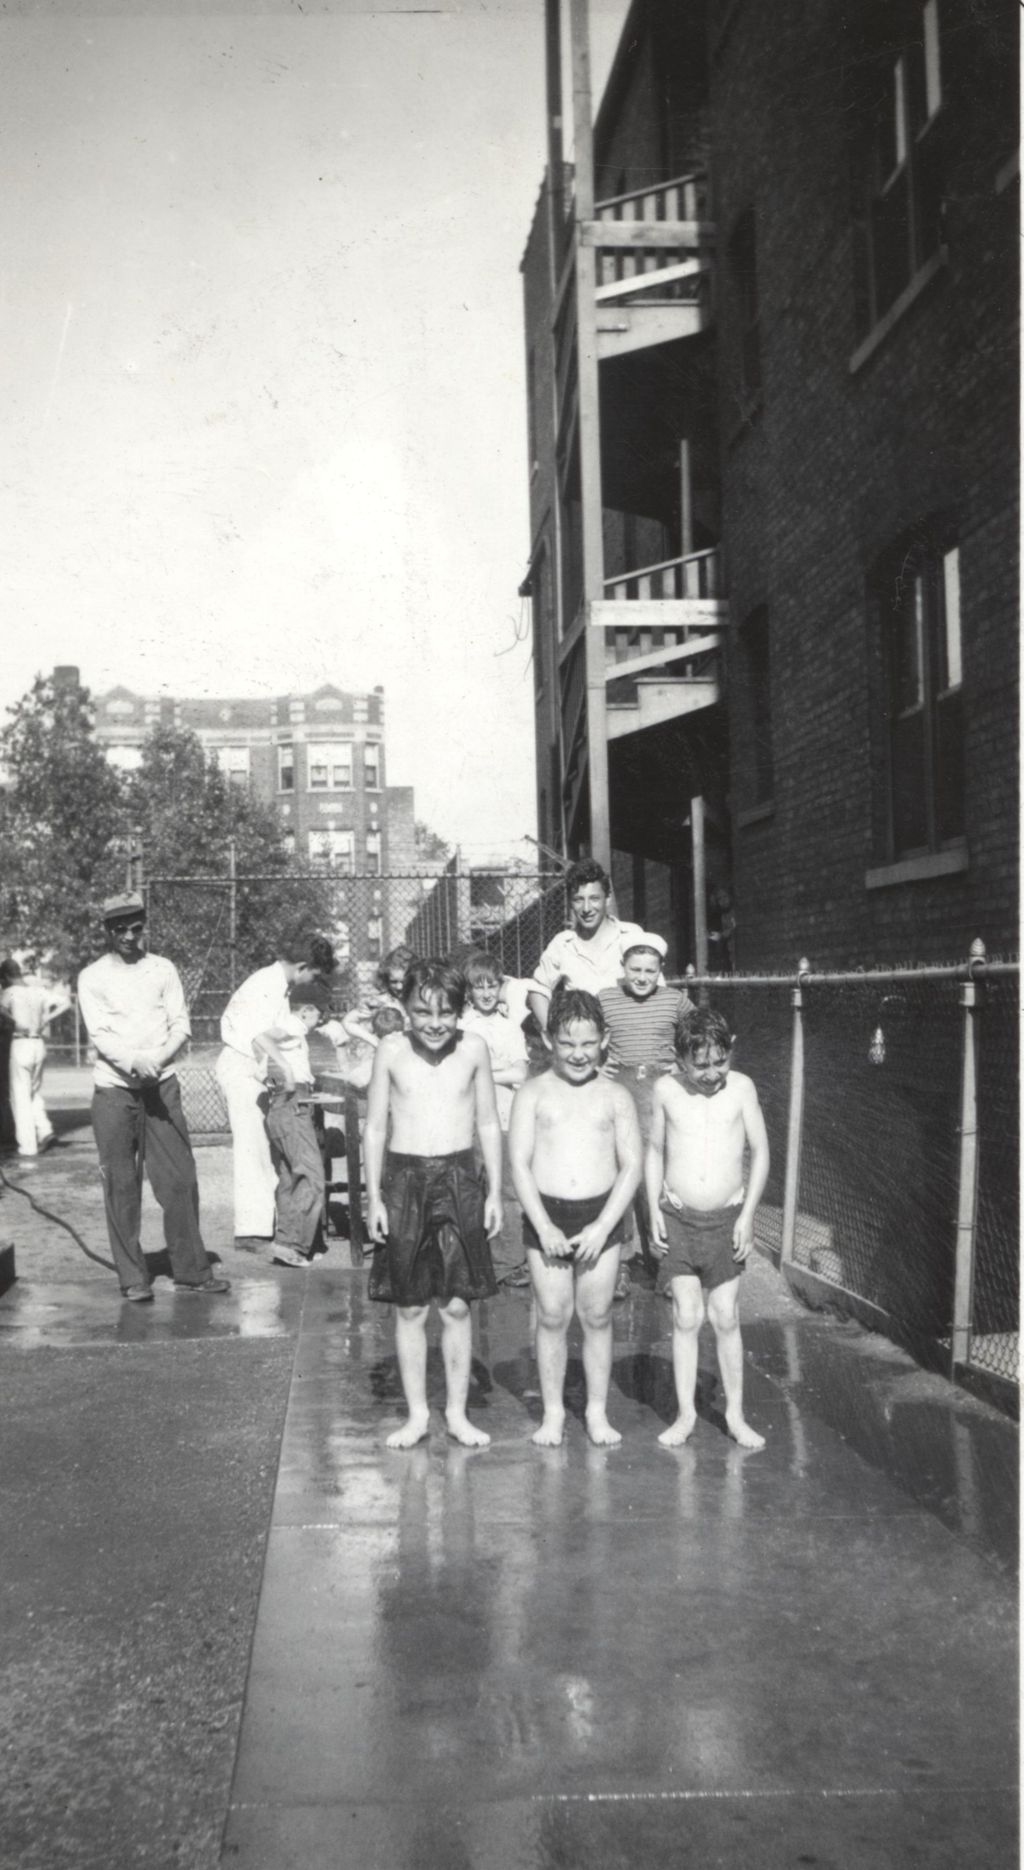 Three boys in bathing suits being sprayed with garden hose